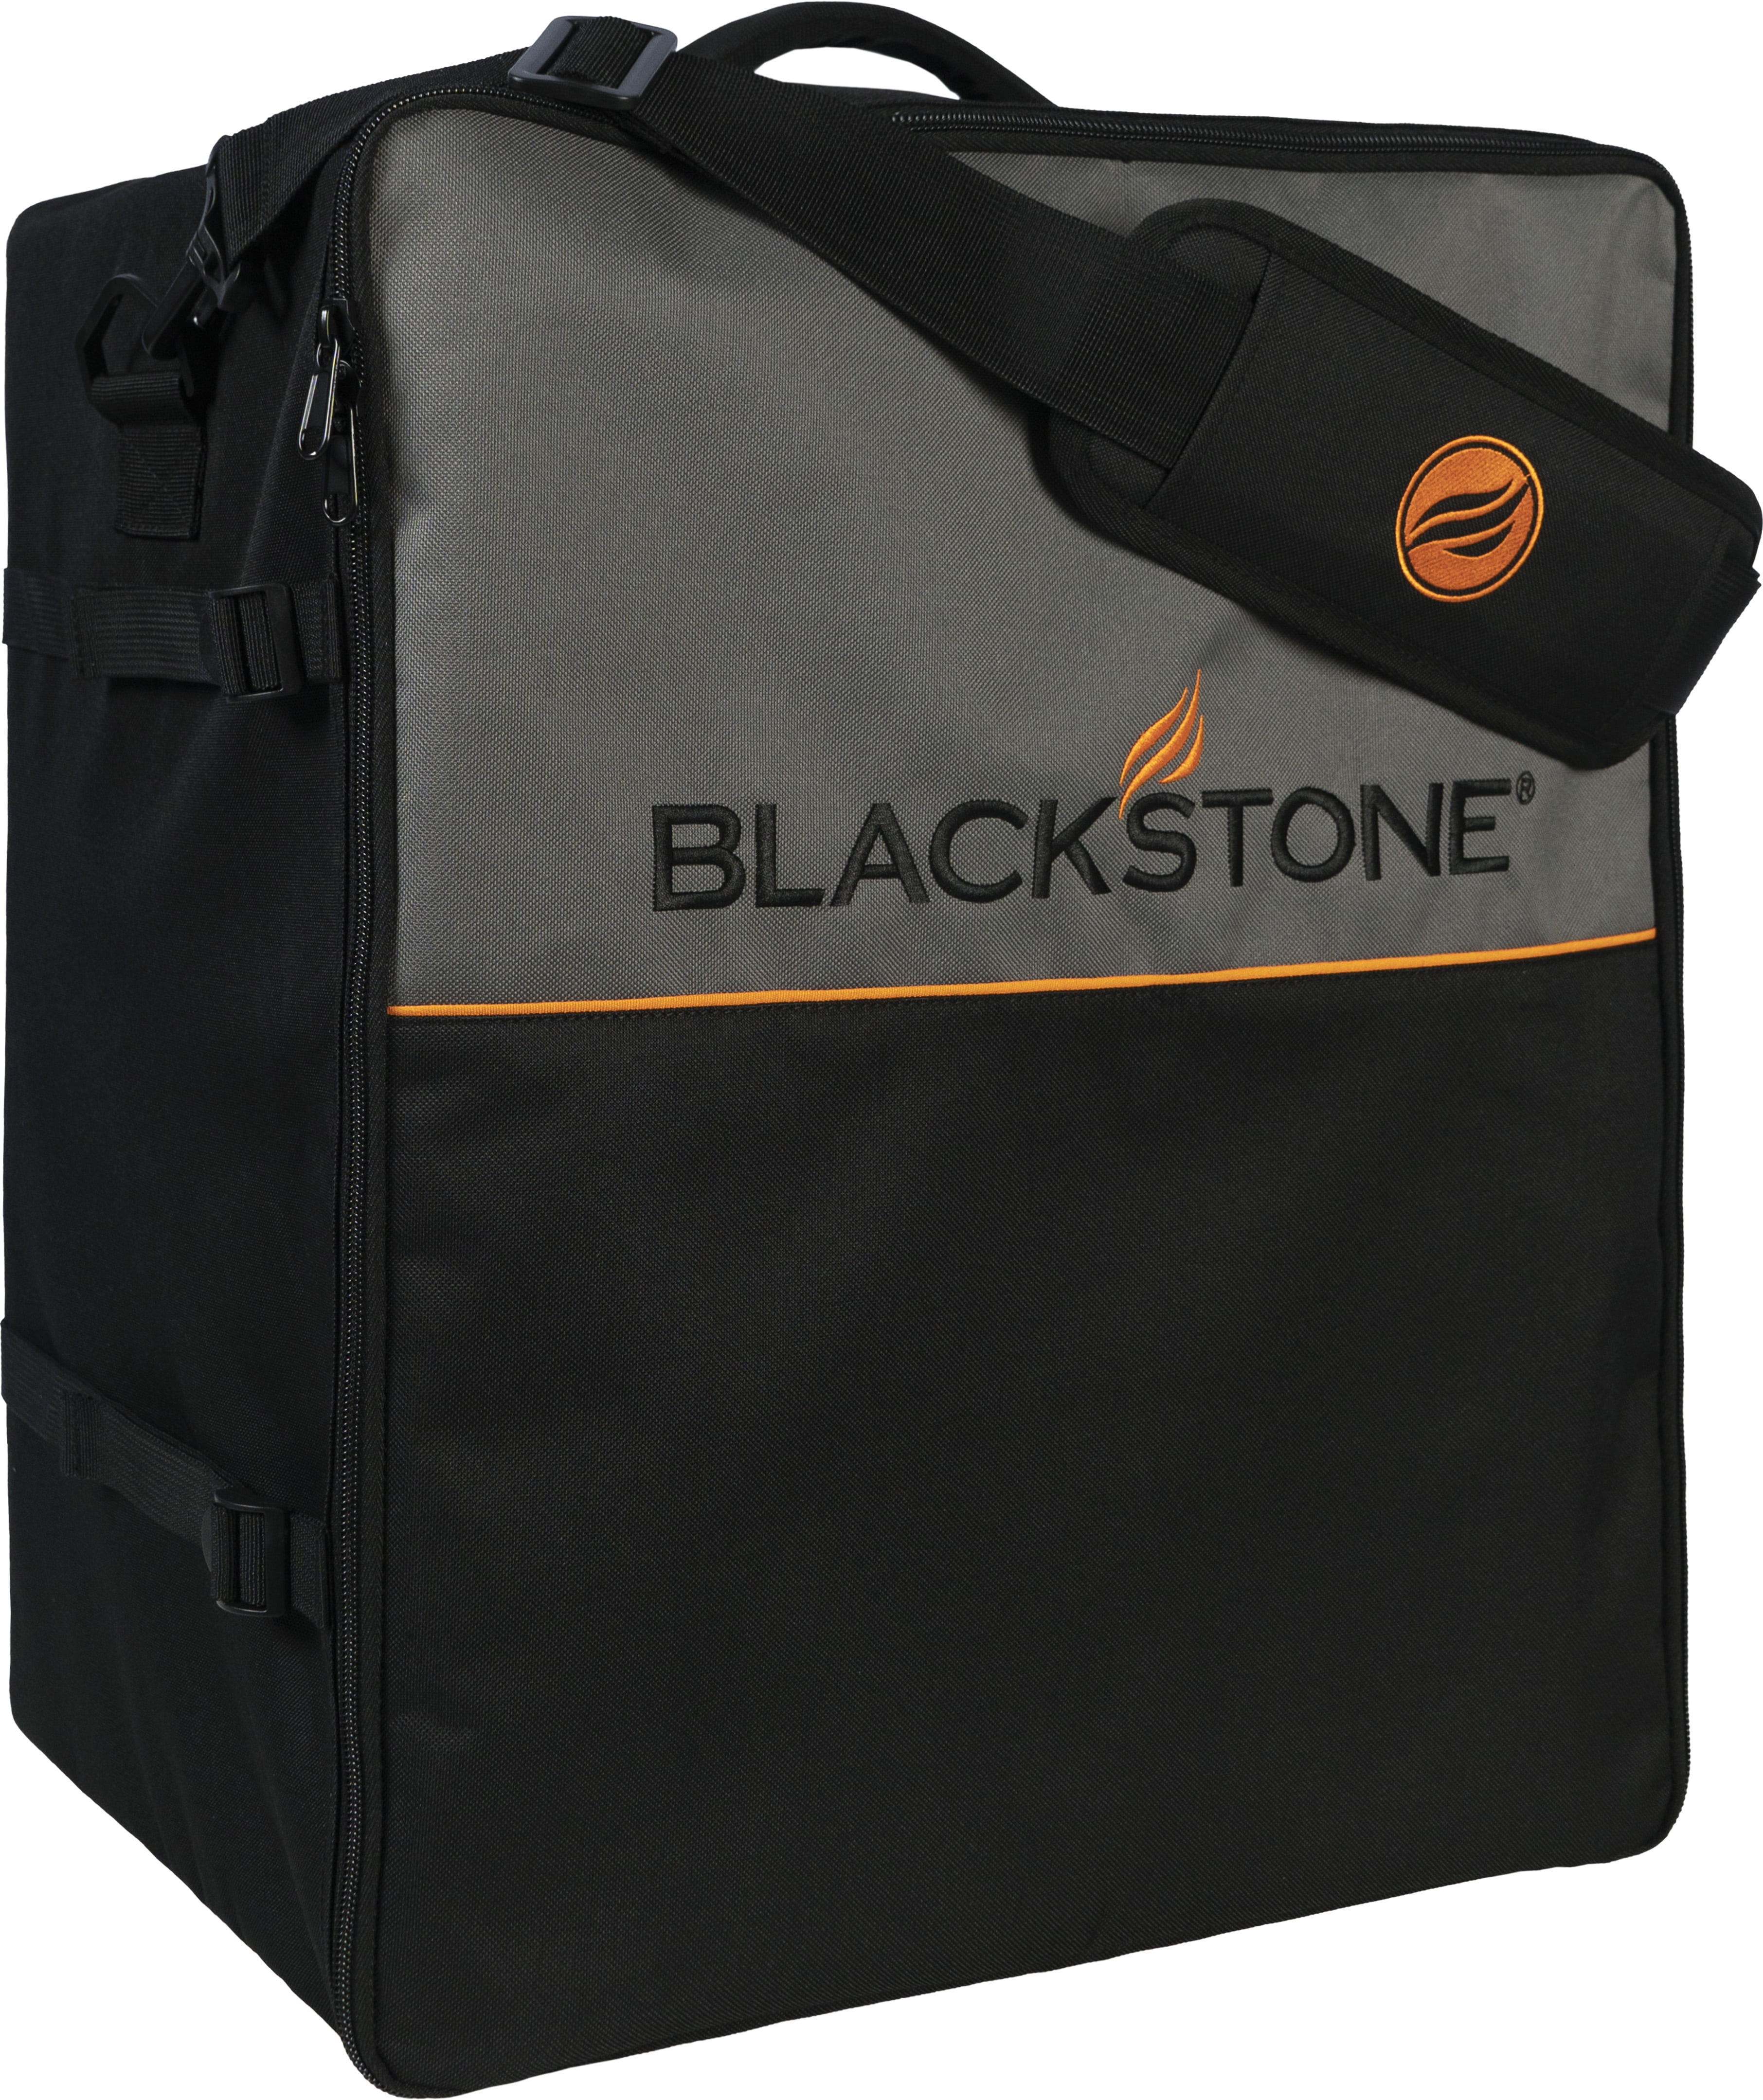 Fits for Blackstone 17 Table Top Griddle,Without Griddle Hood QuliMetal 17 Inch Grill Cover and Carry Bag for Blackstone 17 Grill Griddle